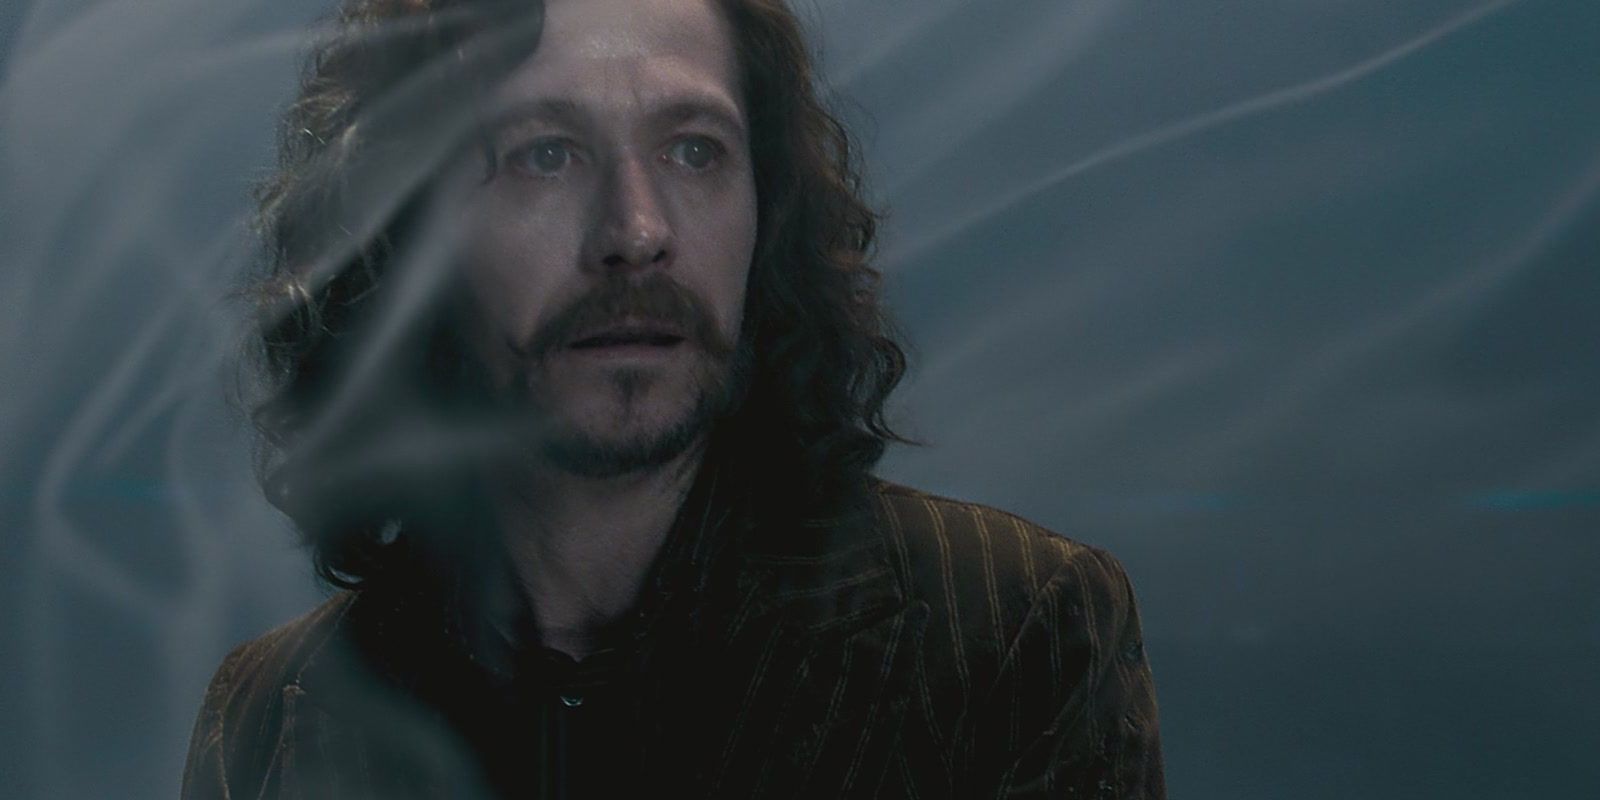 Death of Sirius Black in Harry Potter.